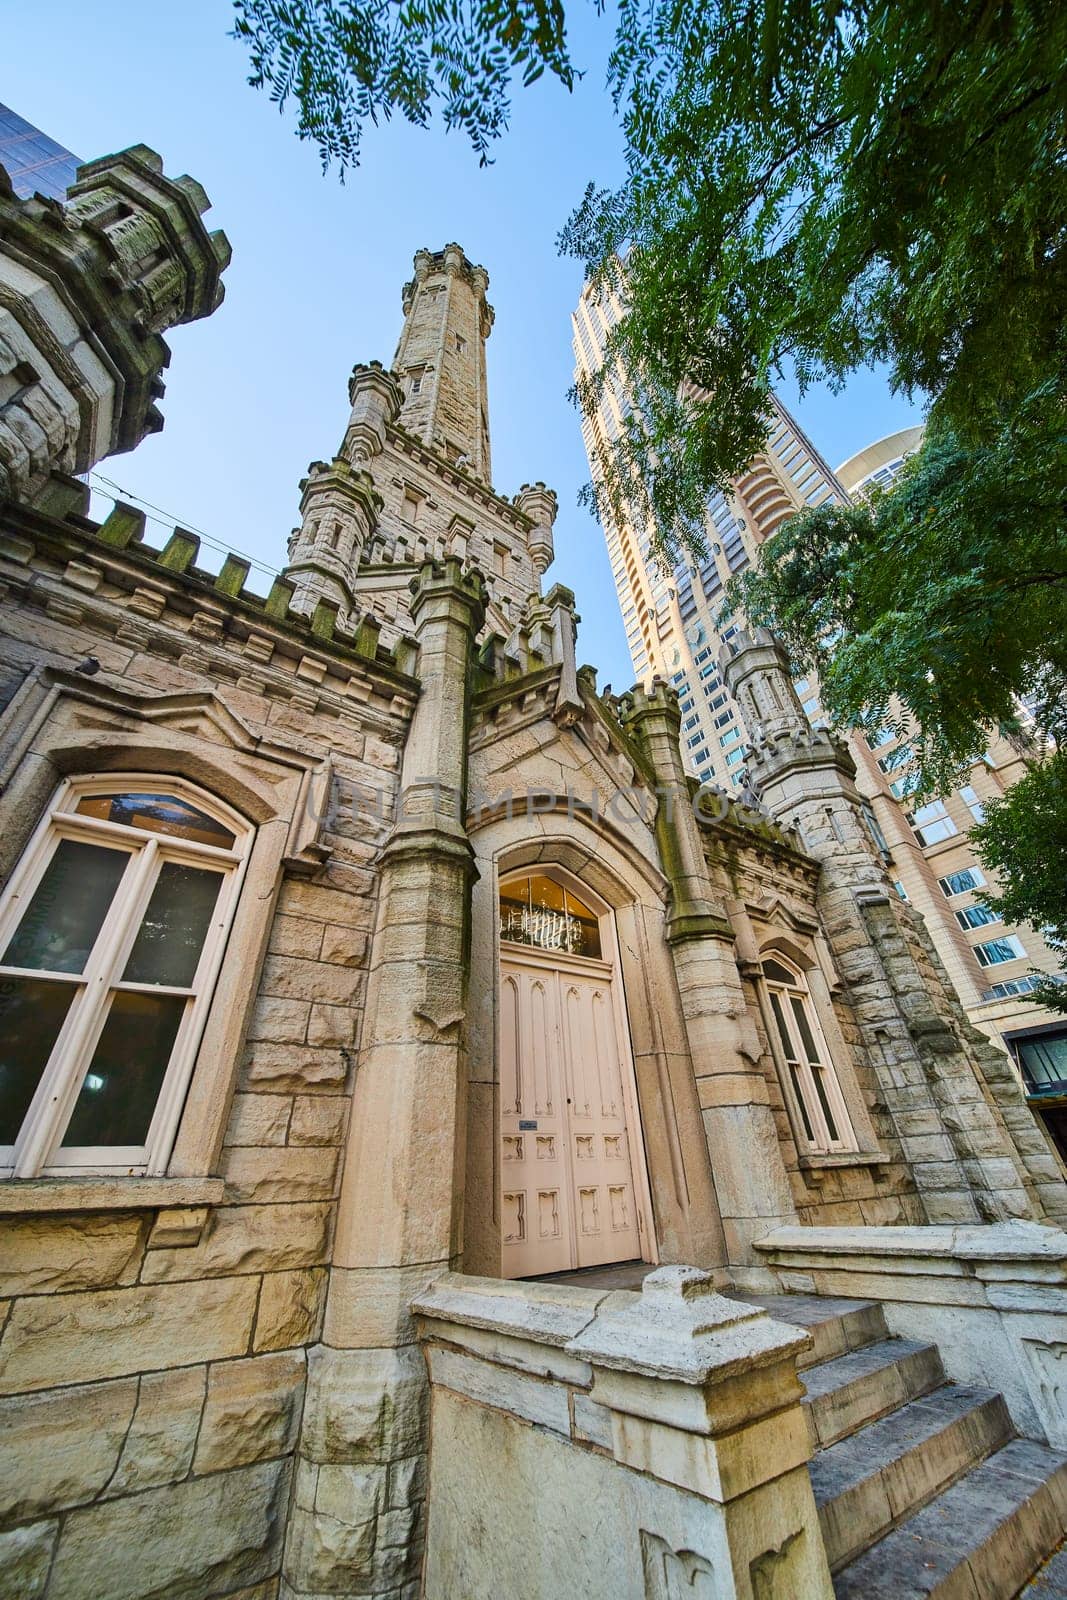 Entrance and tower of Chicago water tower with lush green tree, tourism of city, historic attraction by njproductions